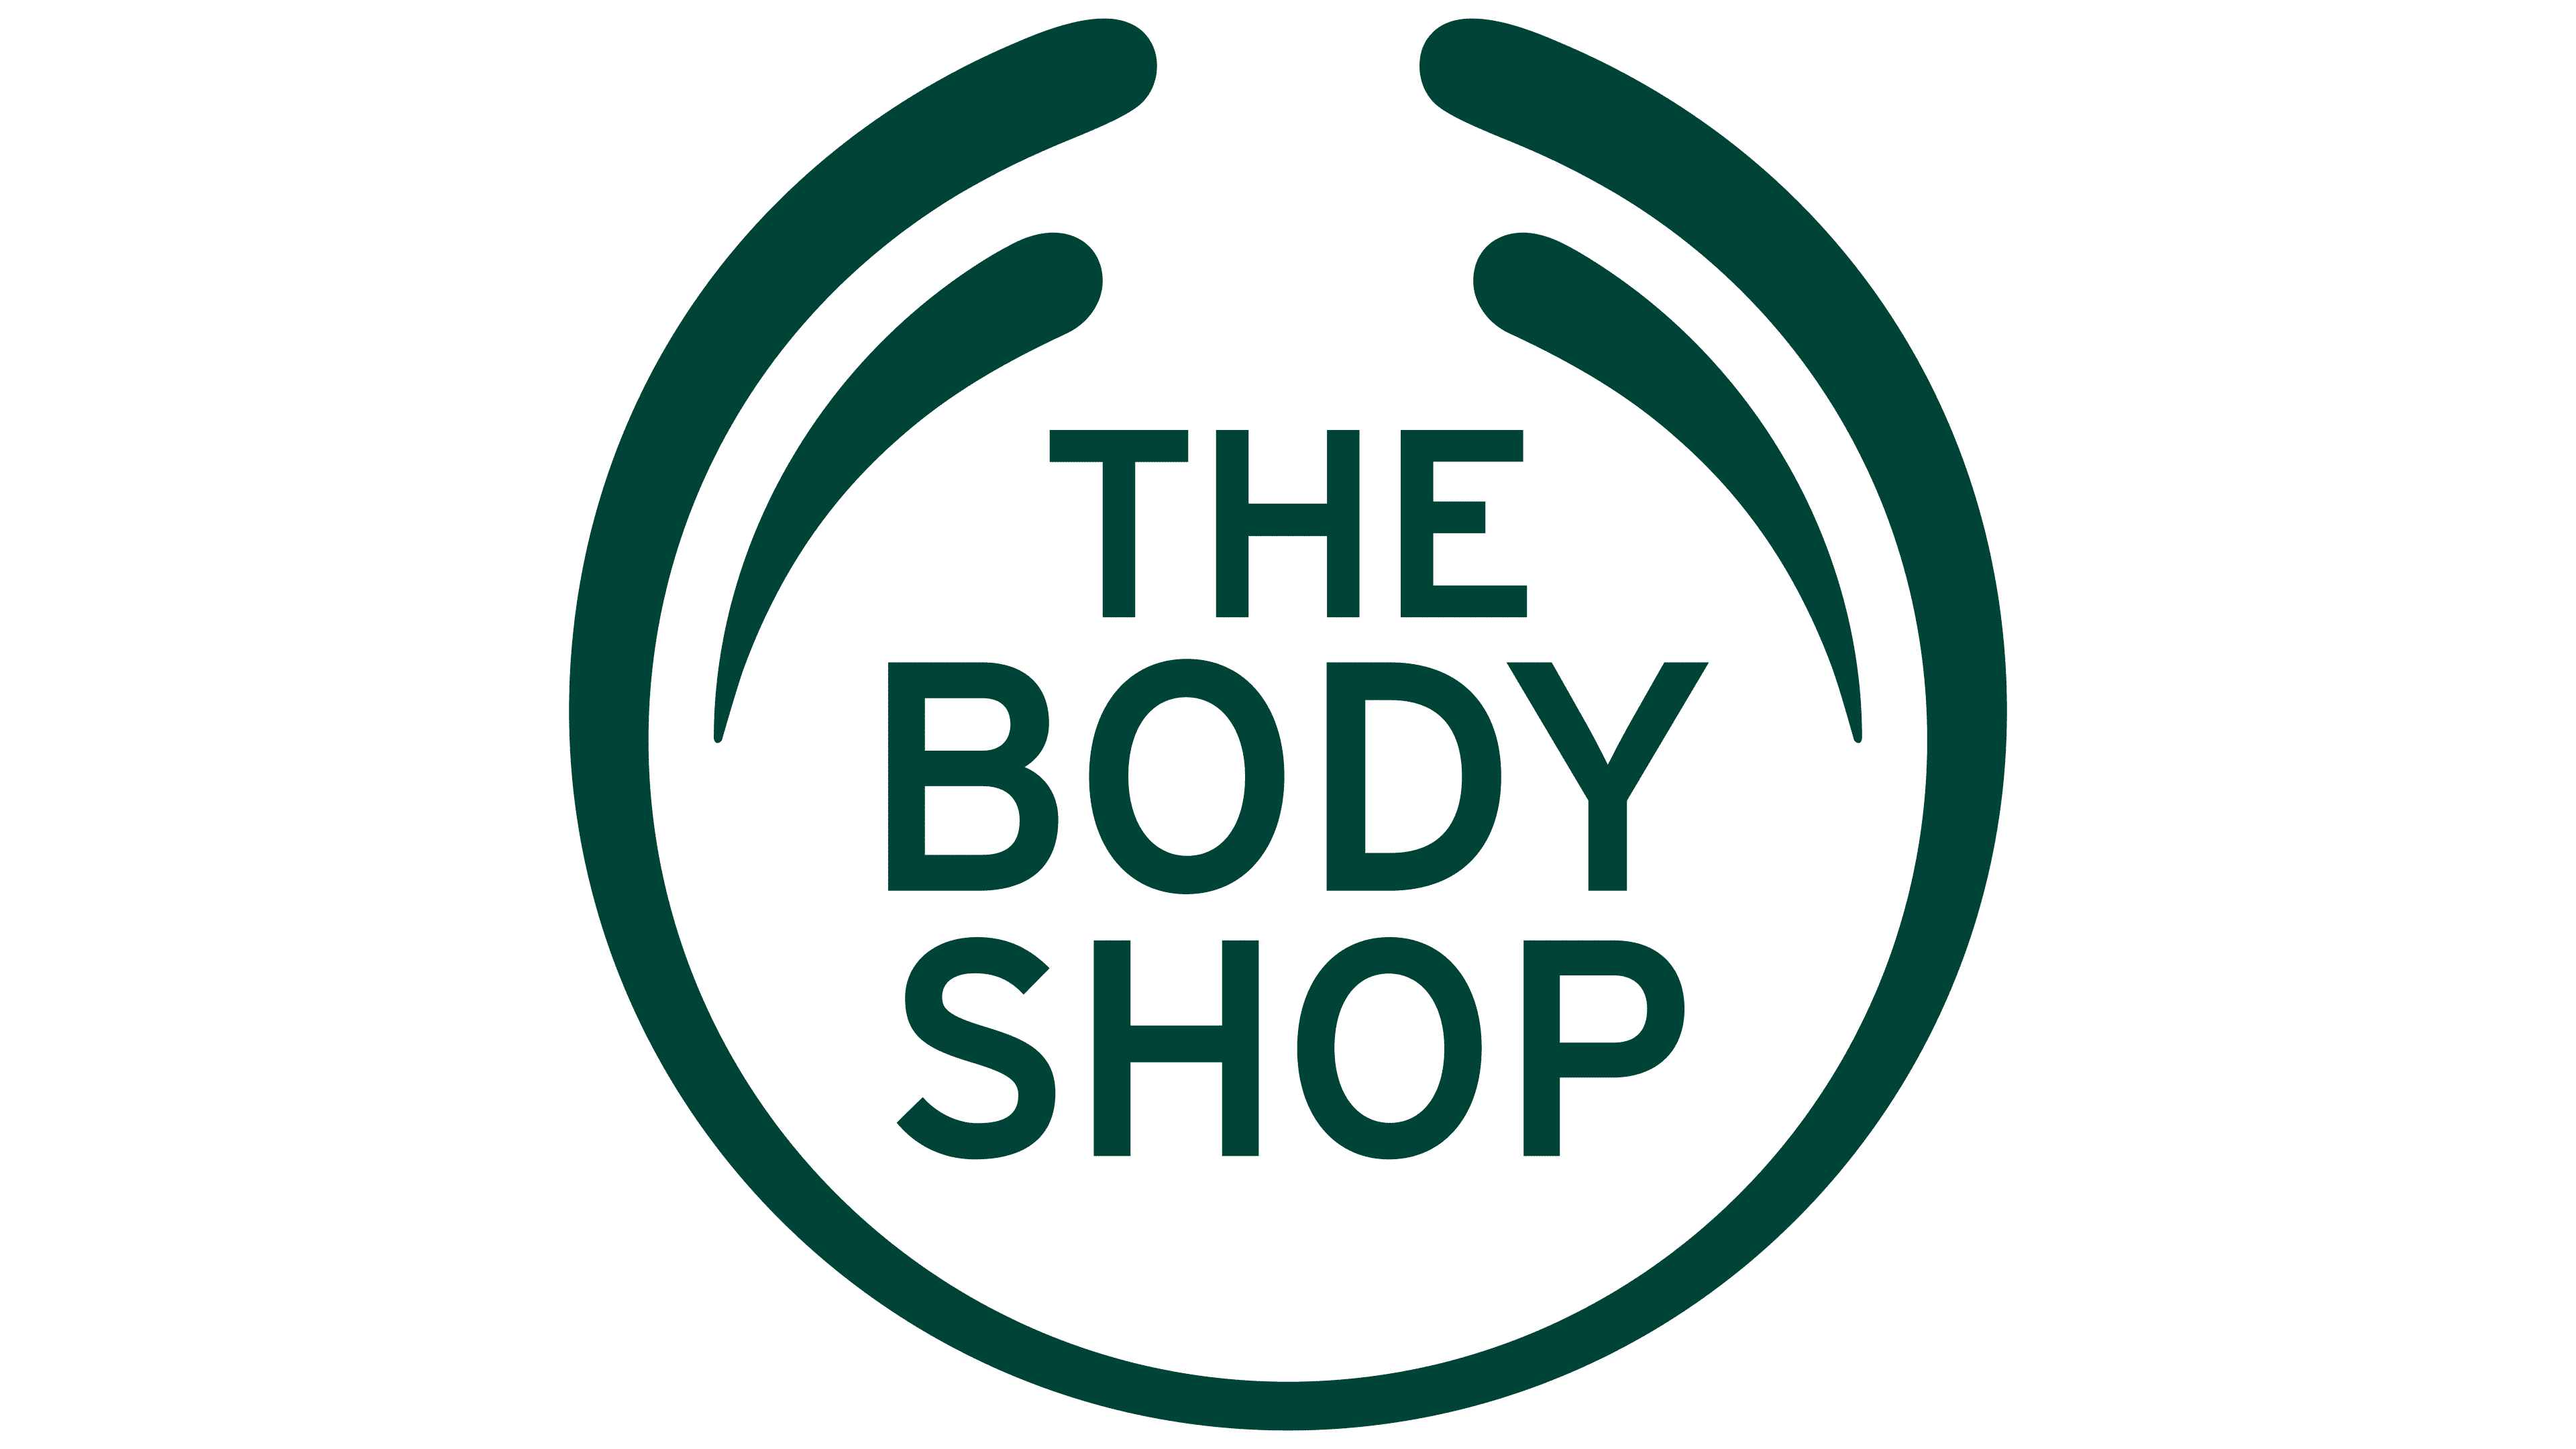 £5 to spend at The Bodyshop on your birthday